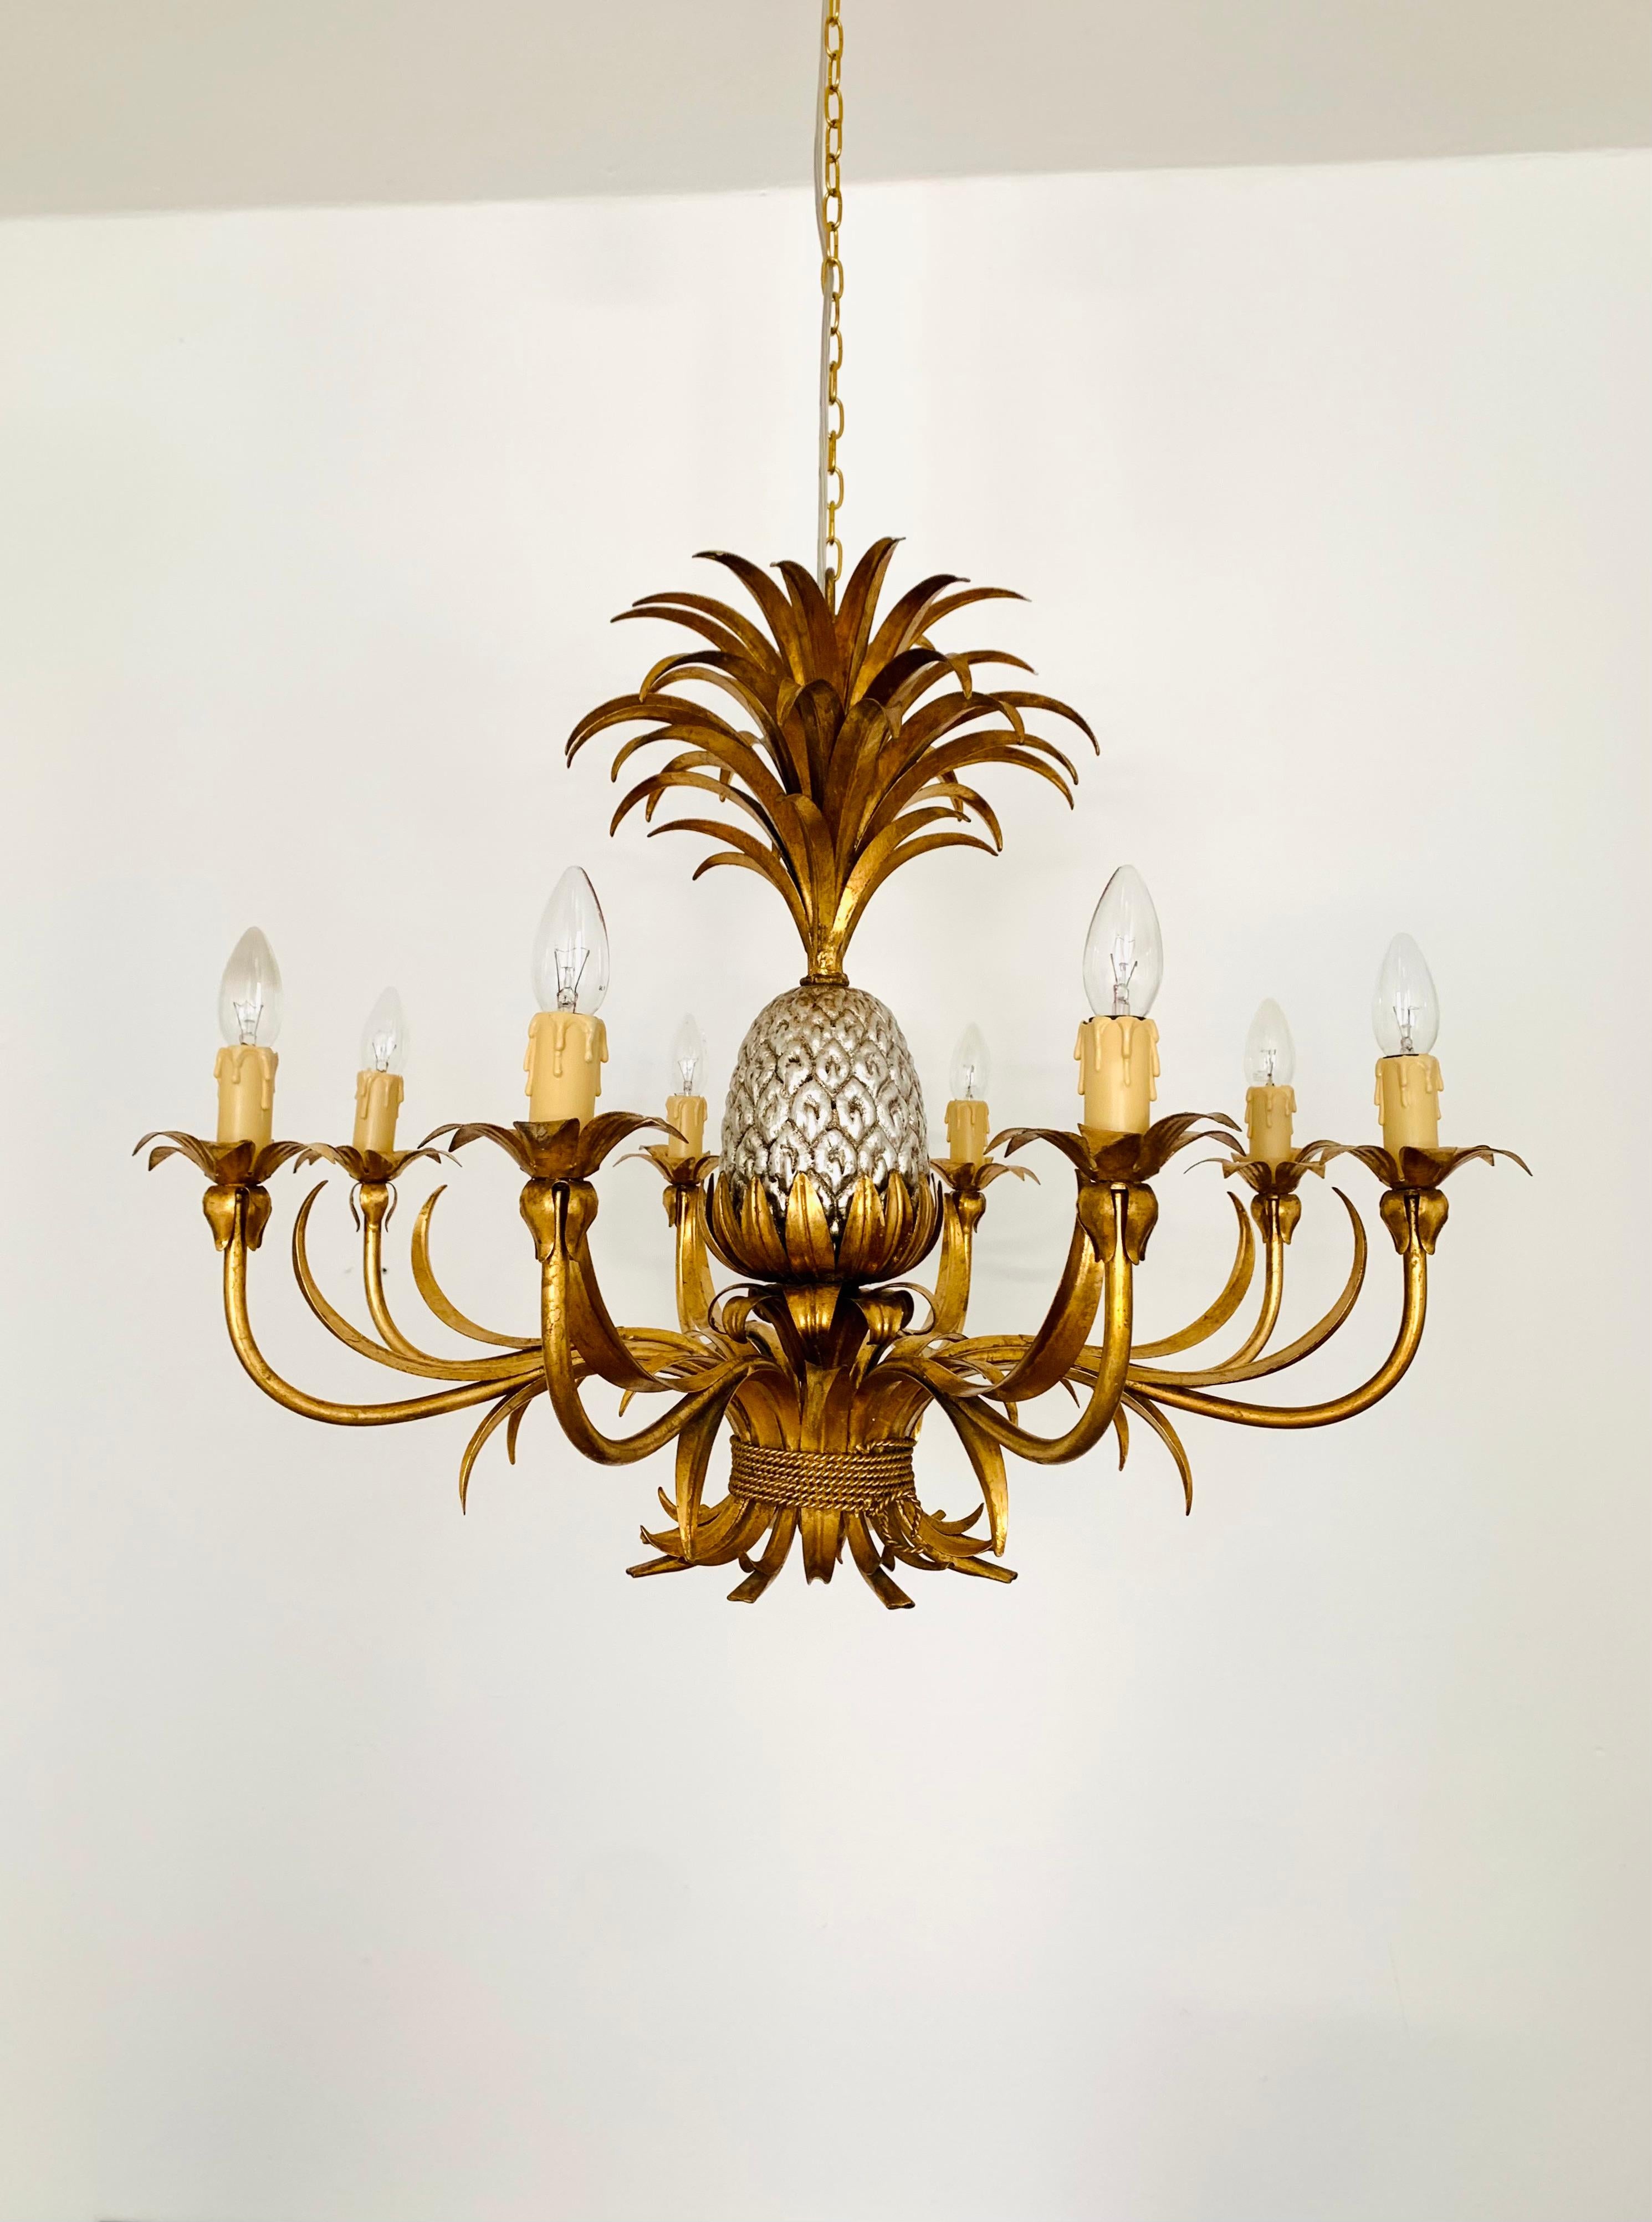 Exceptional decorative and very large chandelier from the 1960s.
Wonderful design and quality craftsmanship.
A warm light is created.

Design: Hans Kögl

Condition:

Very good vintage condition with slight signs of age-related wear.

The pictures